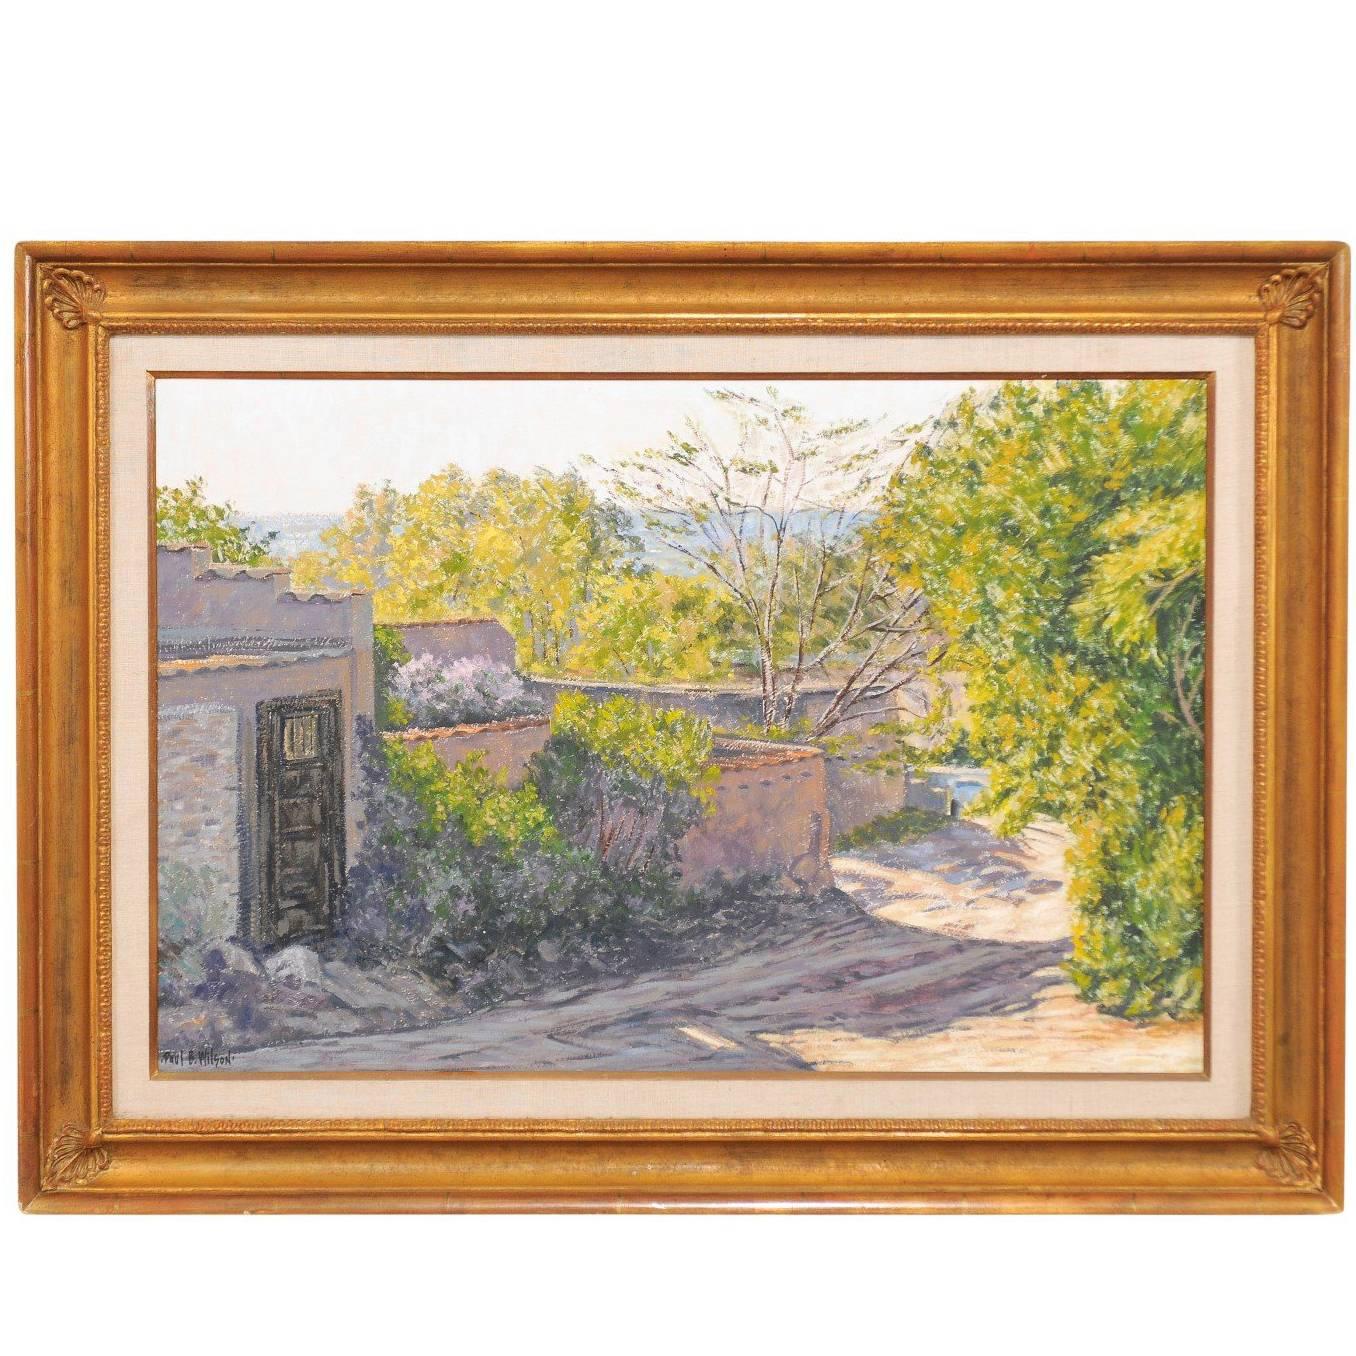 Home and Landscape Framed Oil Painting of Santa Fe, New Mexico of Medium Size For Sale